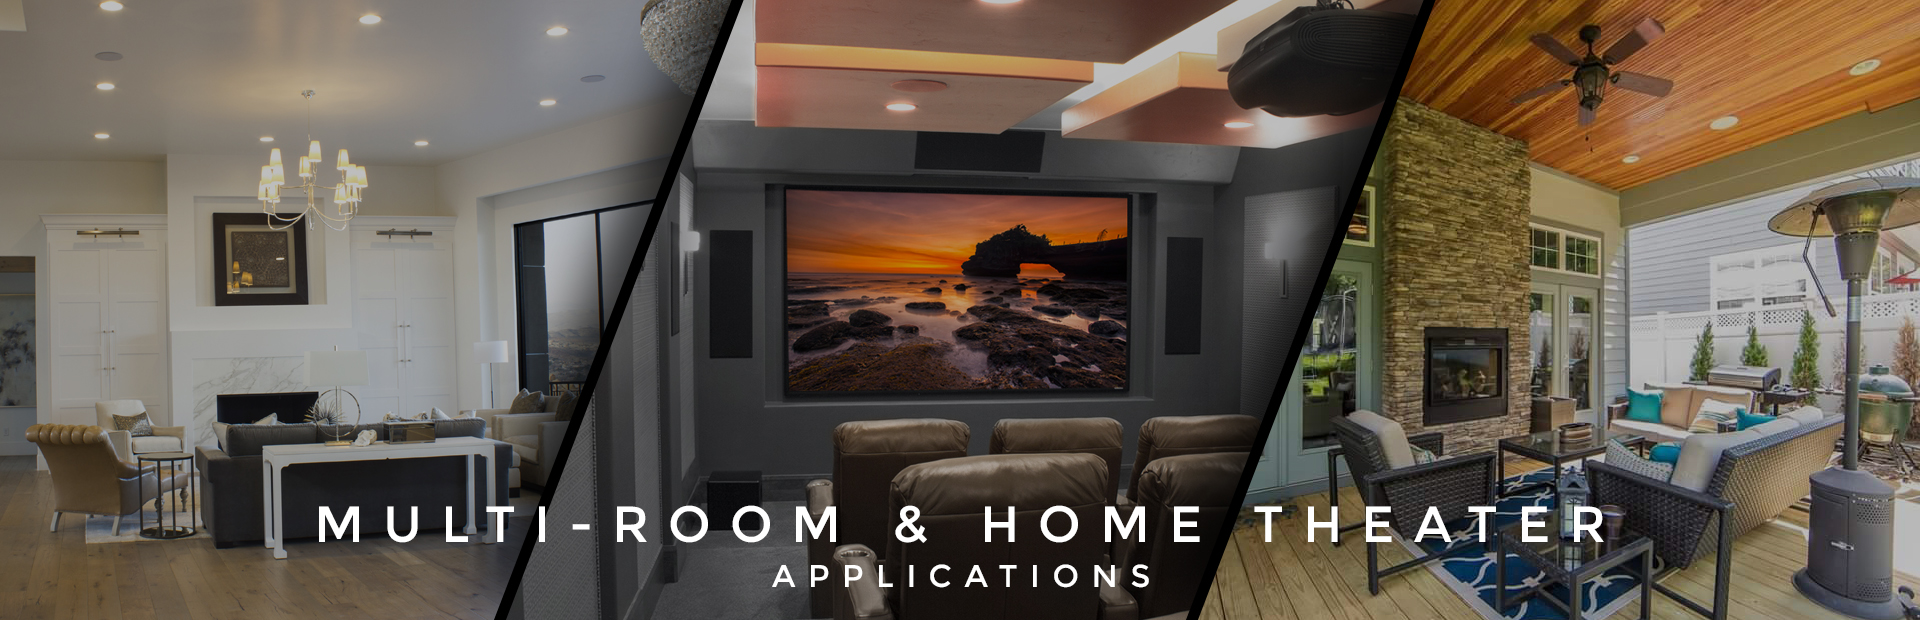 Multi-Room and home theater applications